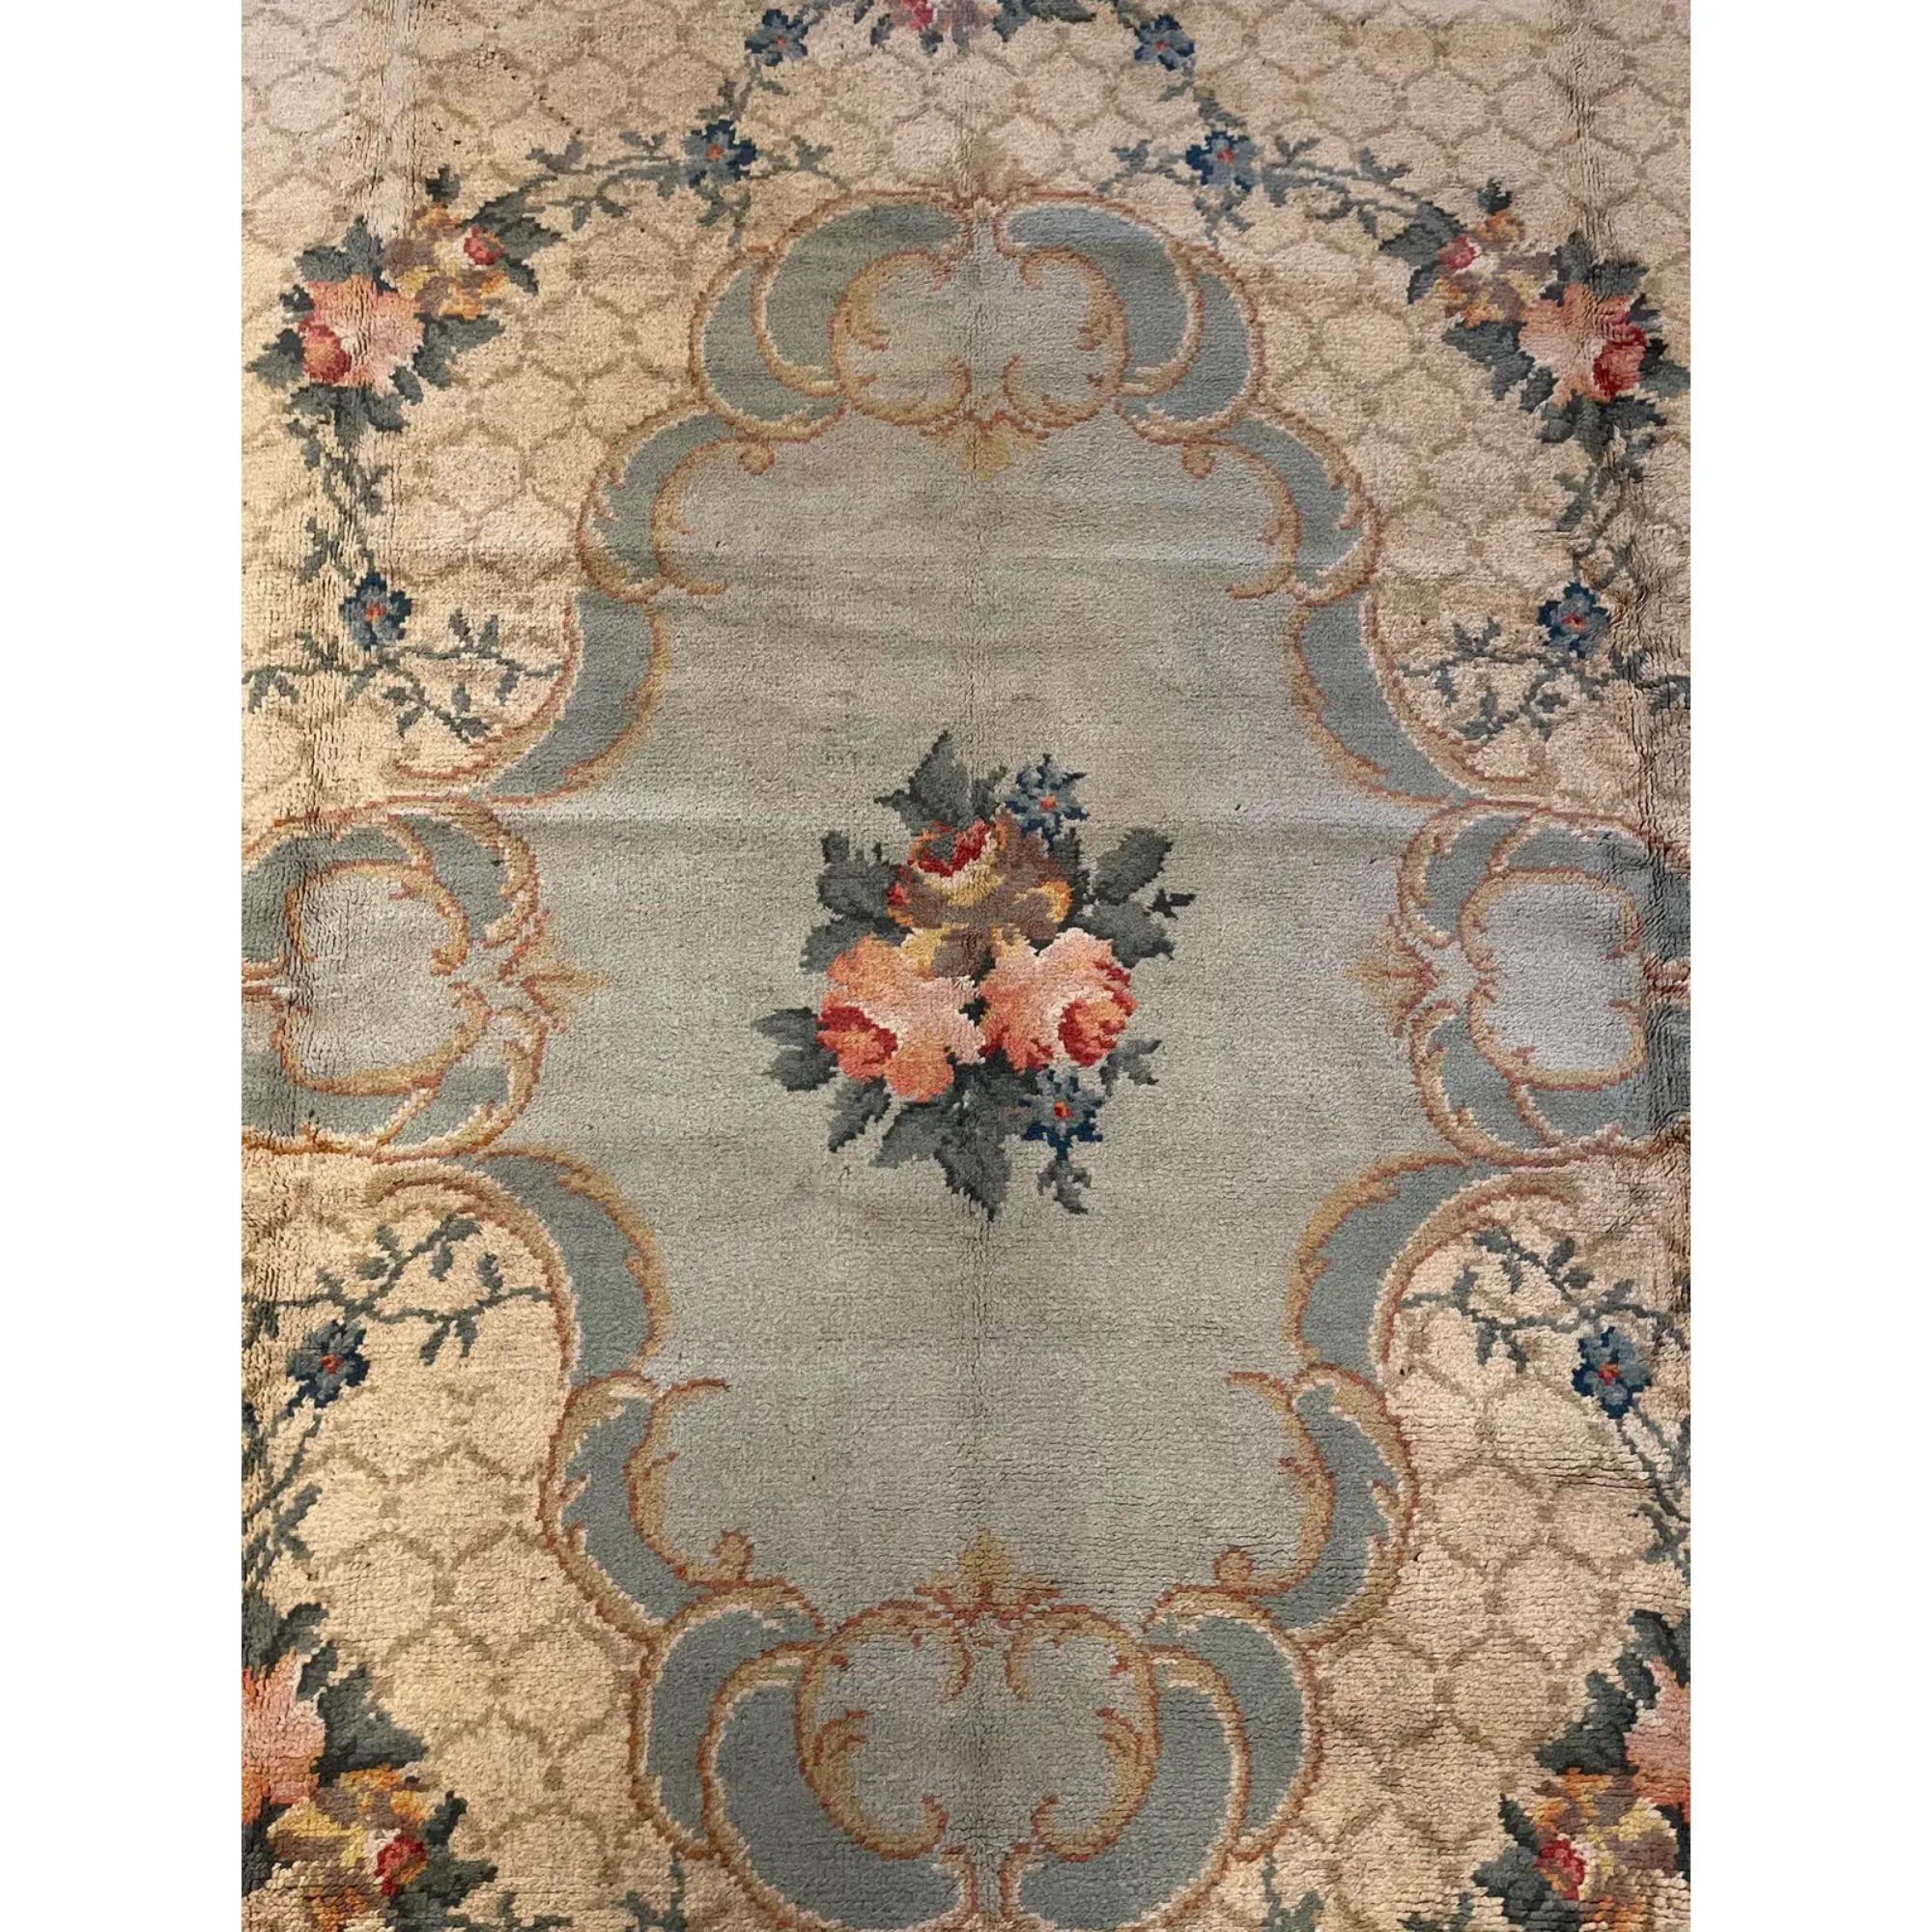 Early 20th Century 1900s Antique European Rug 13′ × 16′3″ For Sale